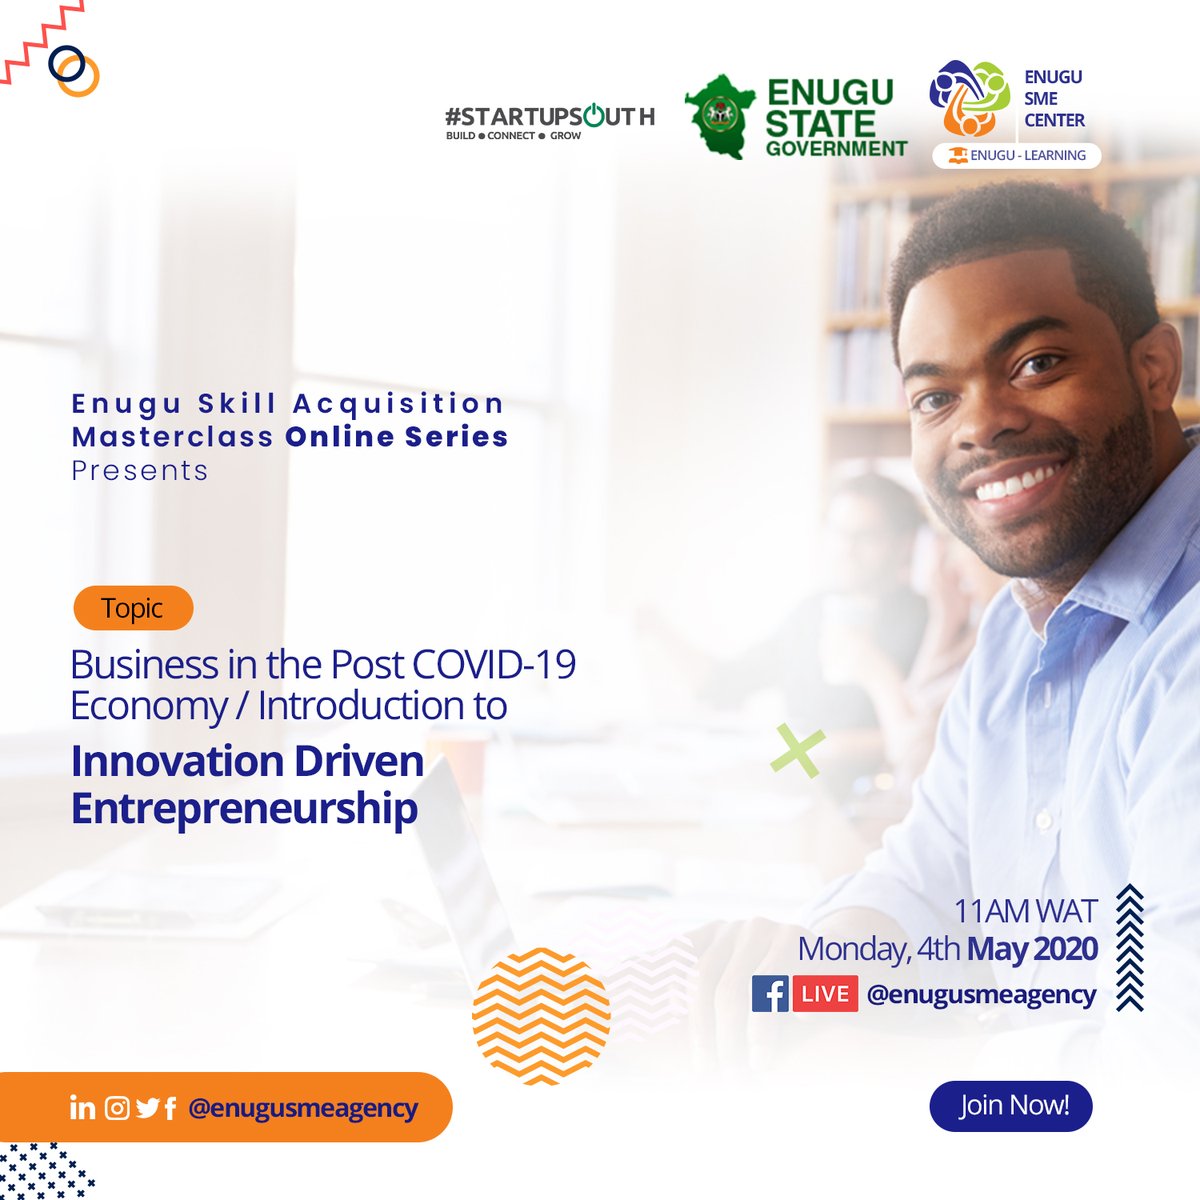 All our Enugu people, let's do this. In partnership with Enugu SME Centre, we'll be running some Startup & Innovation Courses on their Facebook page for two weeks starting this Monday. Like & Follow their FB Page facebook.com/ENUGUSTATESMEA… Register here bit.ly/enugulearning